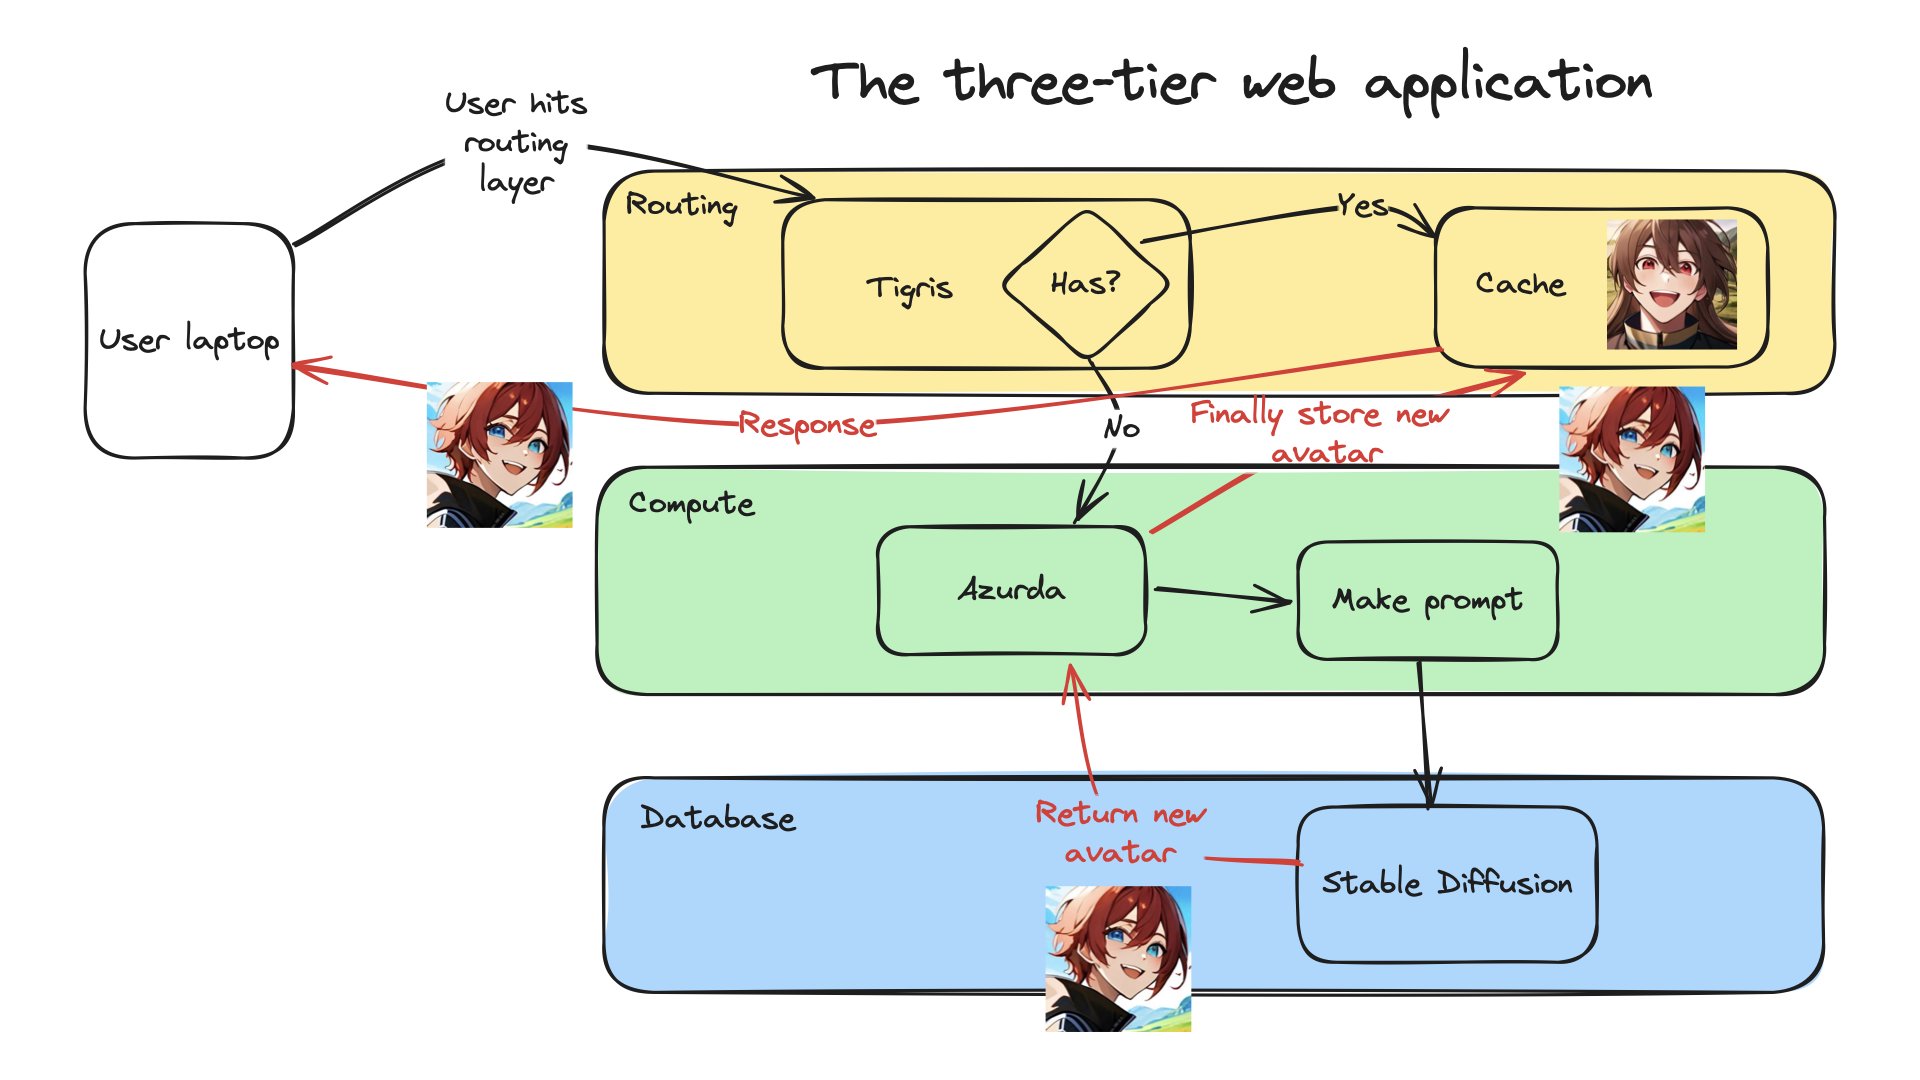 A diagram explaining how all of the logic works in the style of a three-tier web application chart. Tigris is the routing layer with a cache, Azurda is the compute layer, and Stable Diffusion is the database layer.